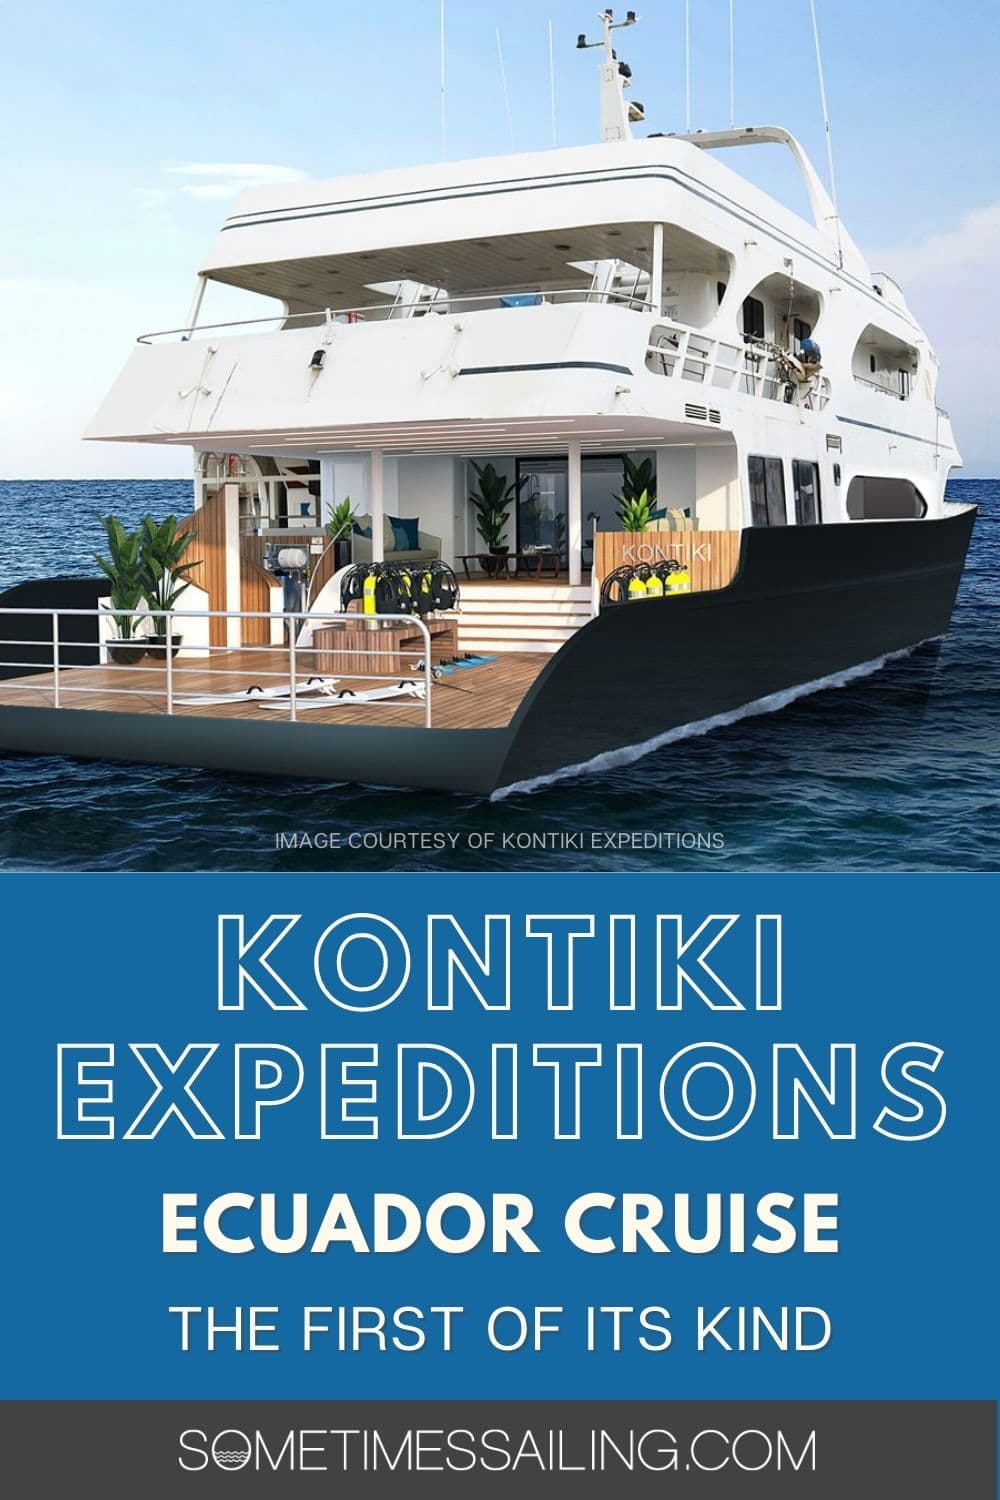 Kontiki Expeditions Ecuador Cruise: the first of its kind.